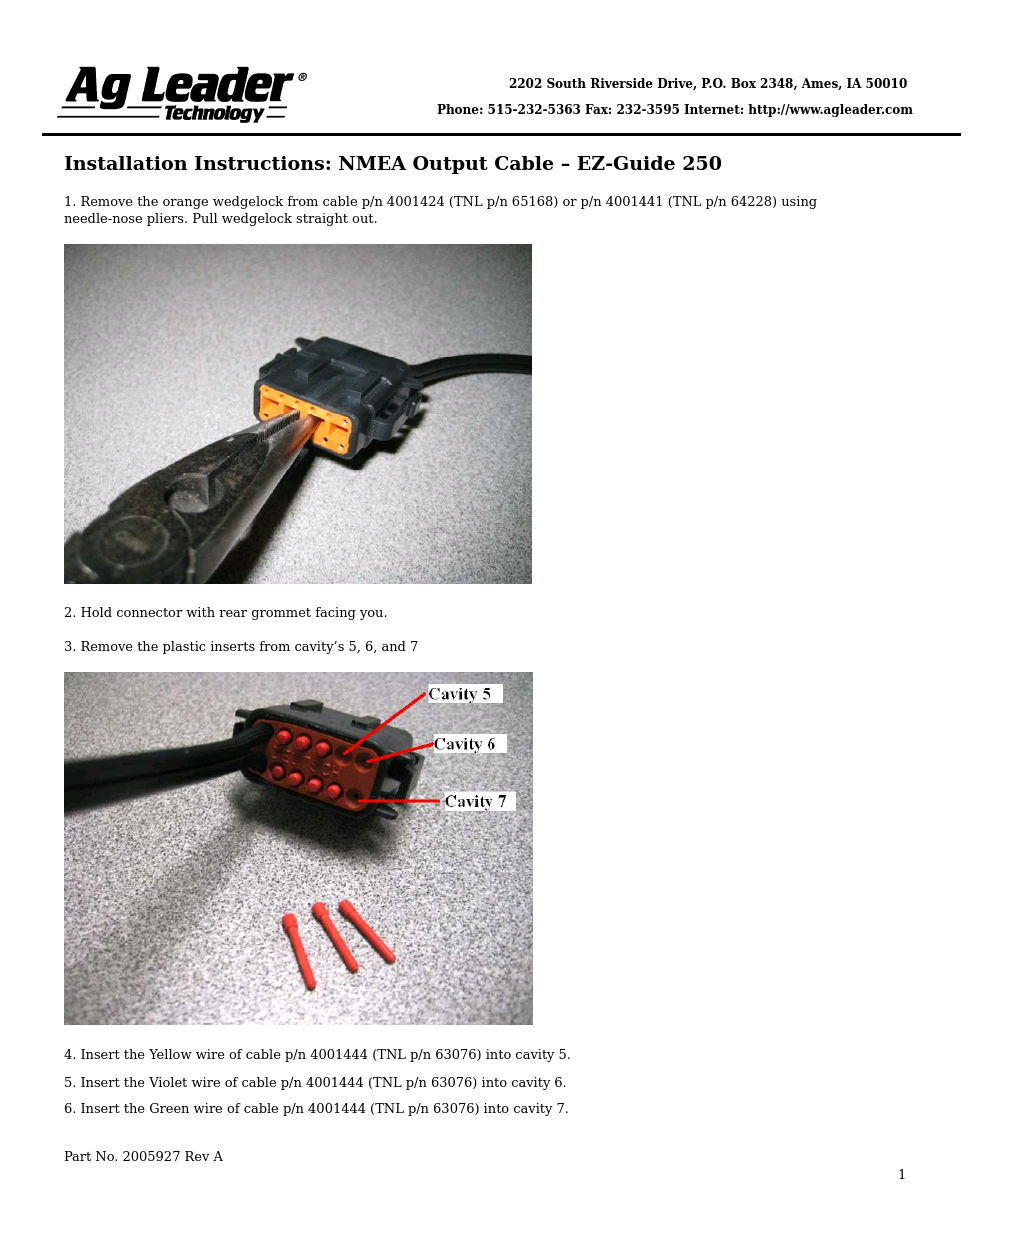 EZ-Guide 250 NMEA Output Cable Installation